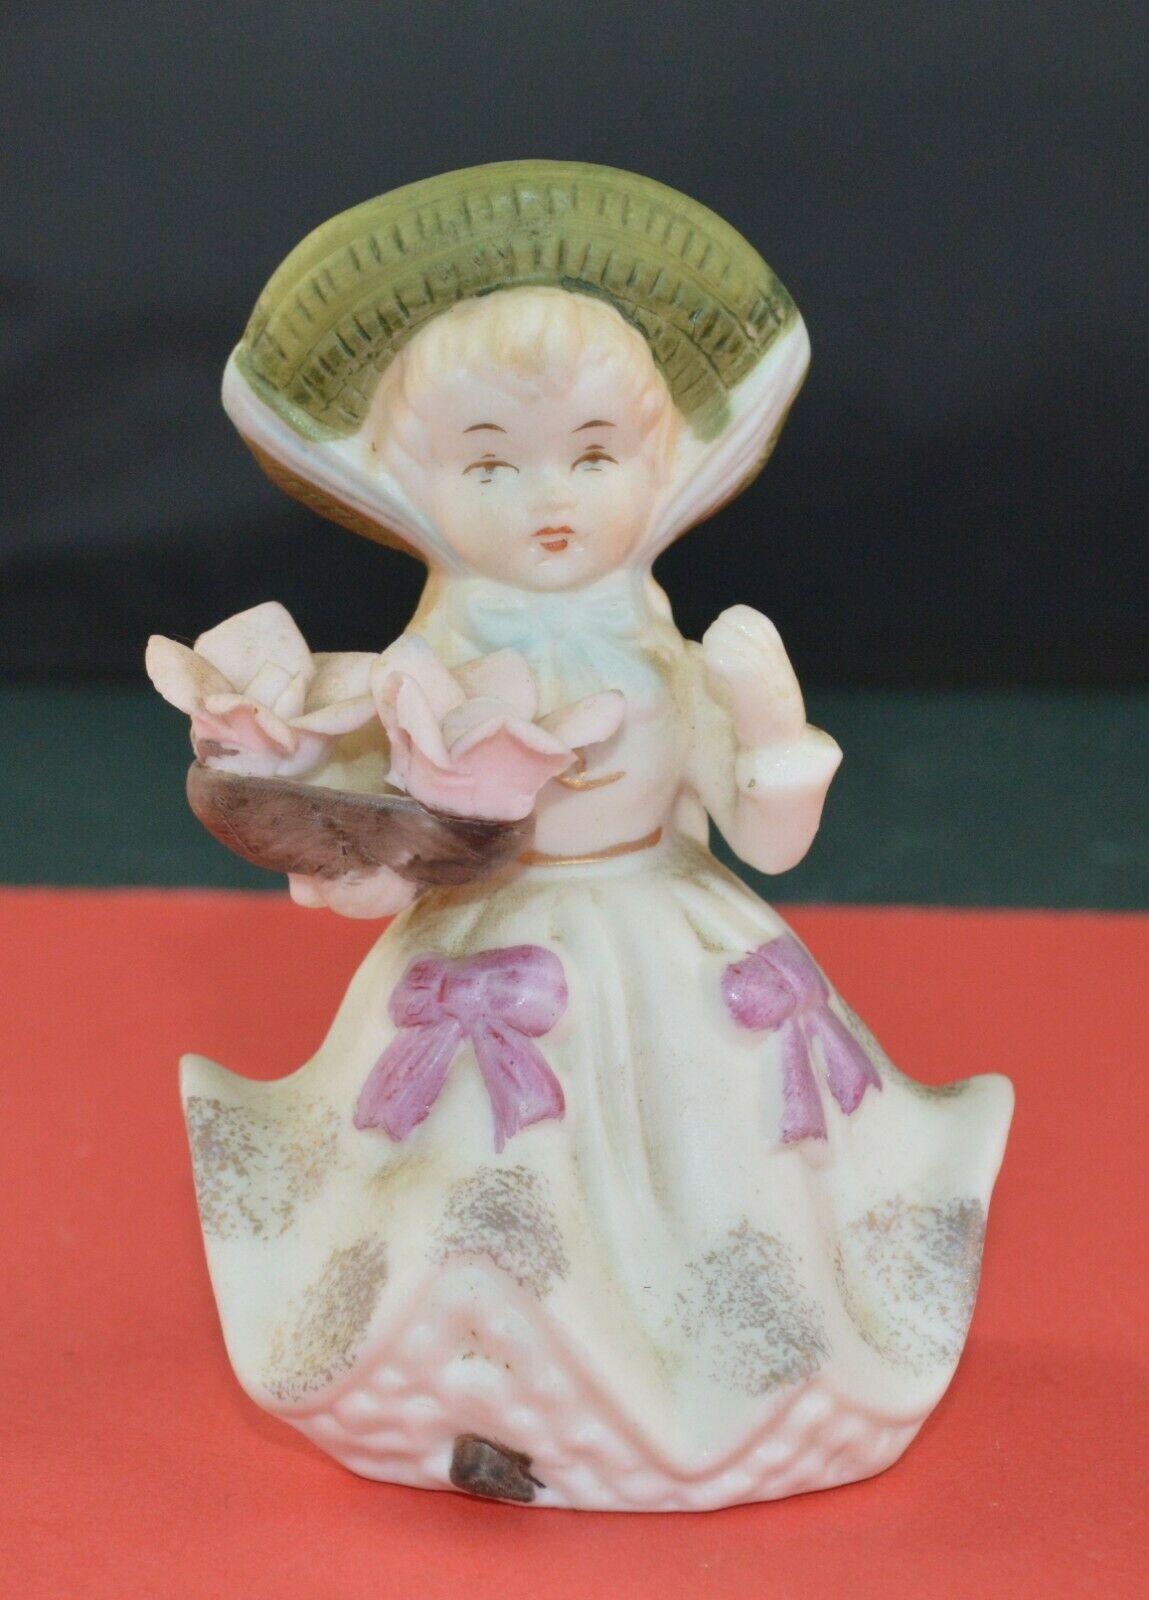 FAIRYLITE FOREIGN DECORATIVE FIGURINE GIRL WEARING A BONNET - TMD167207